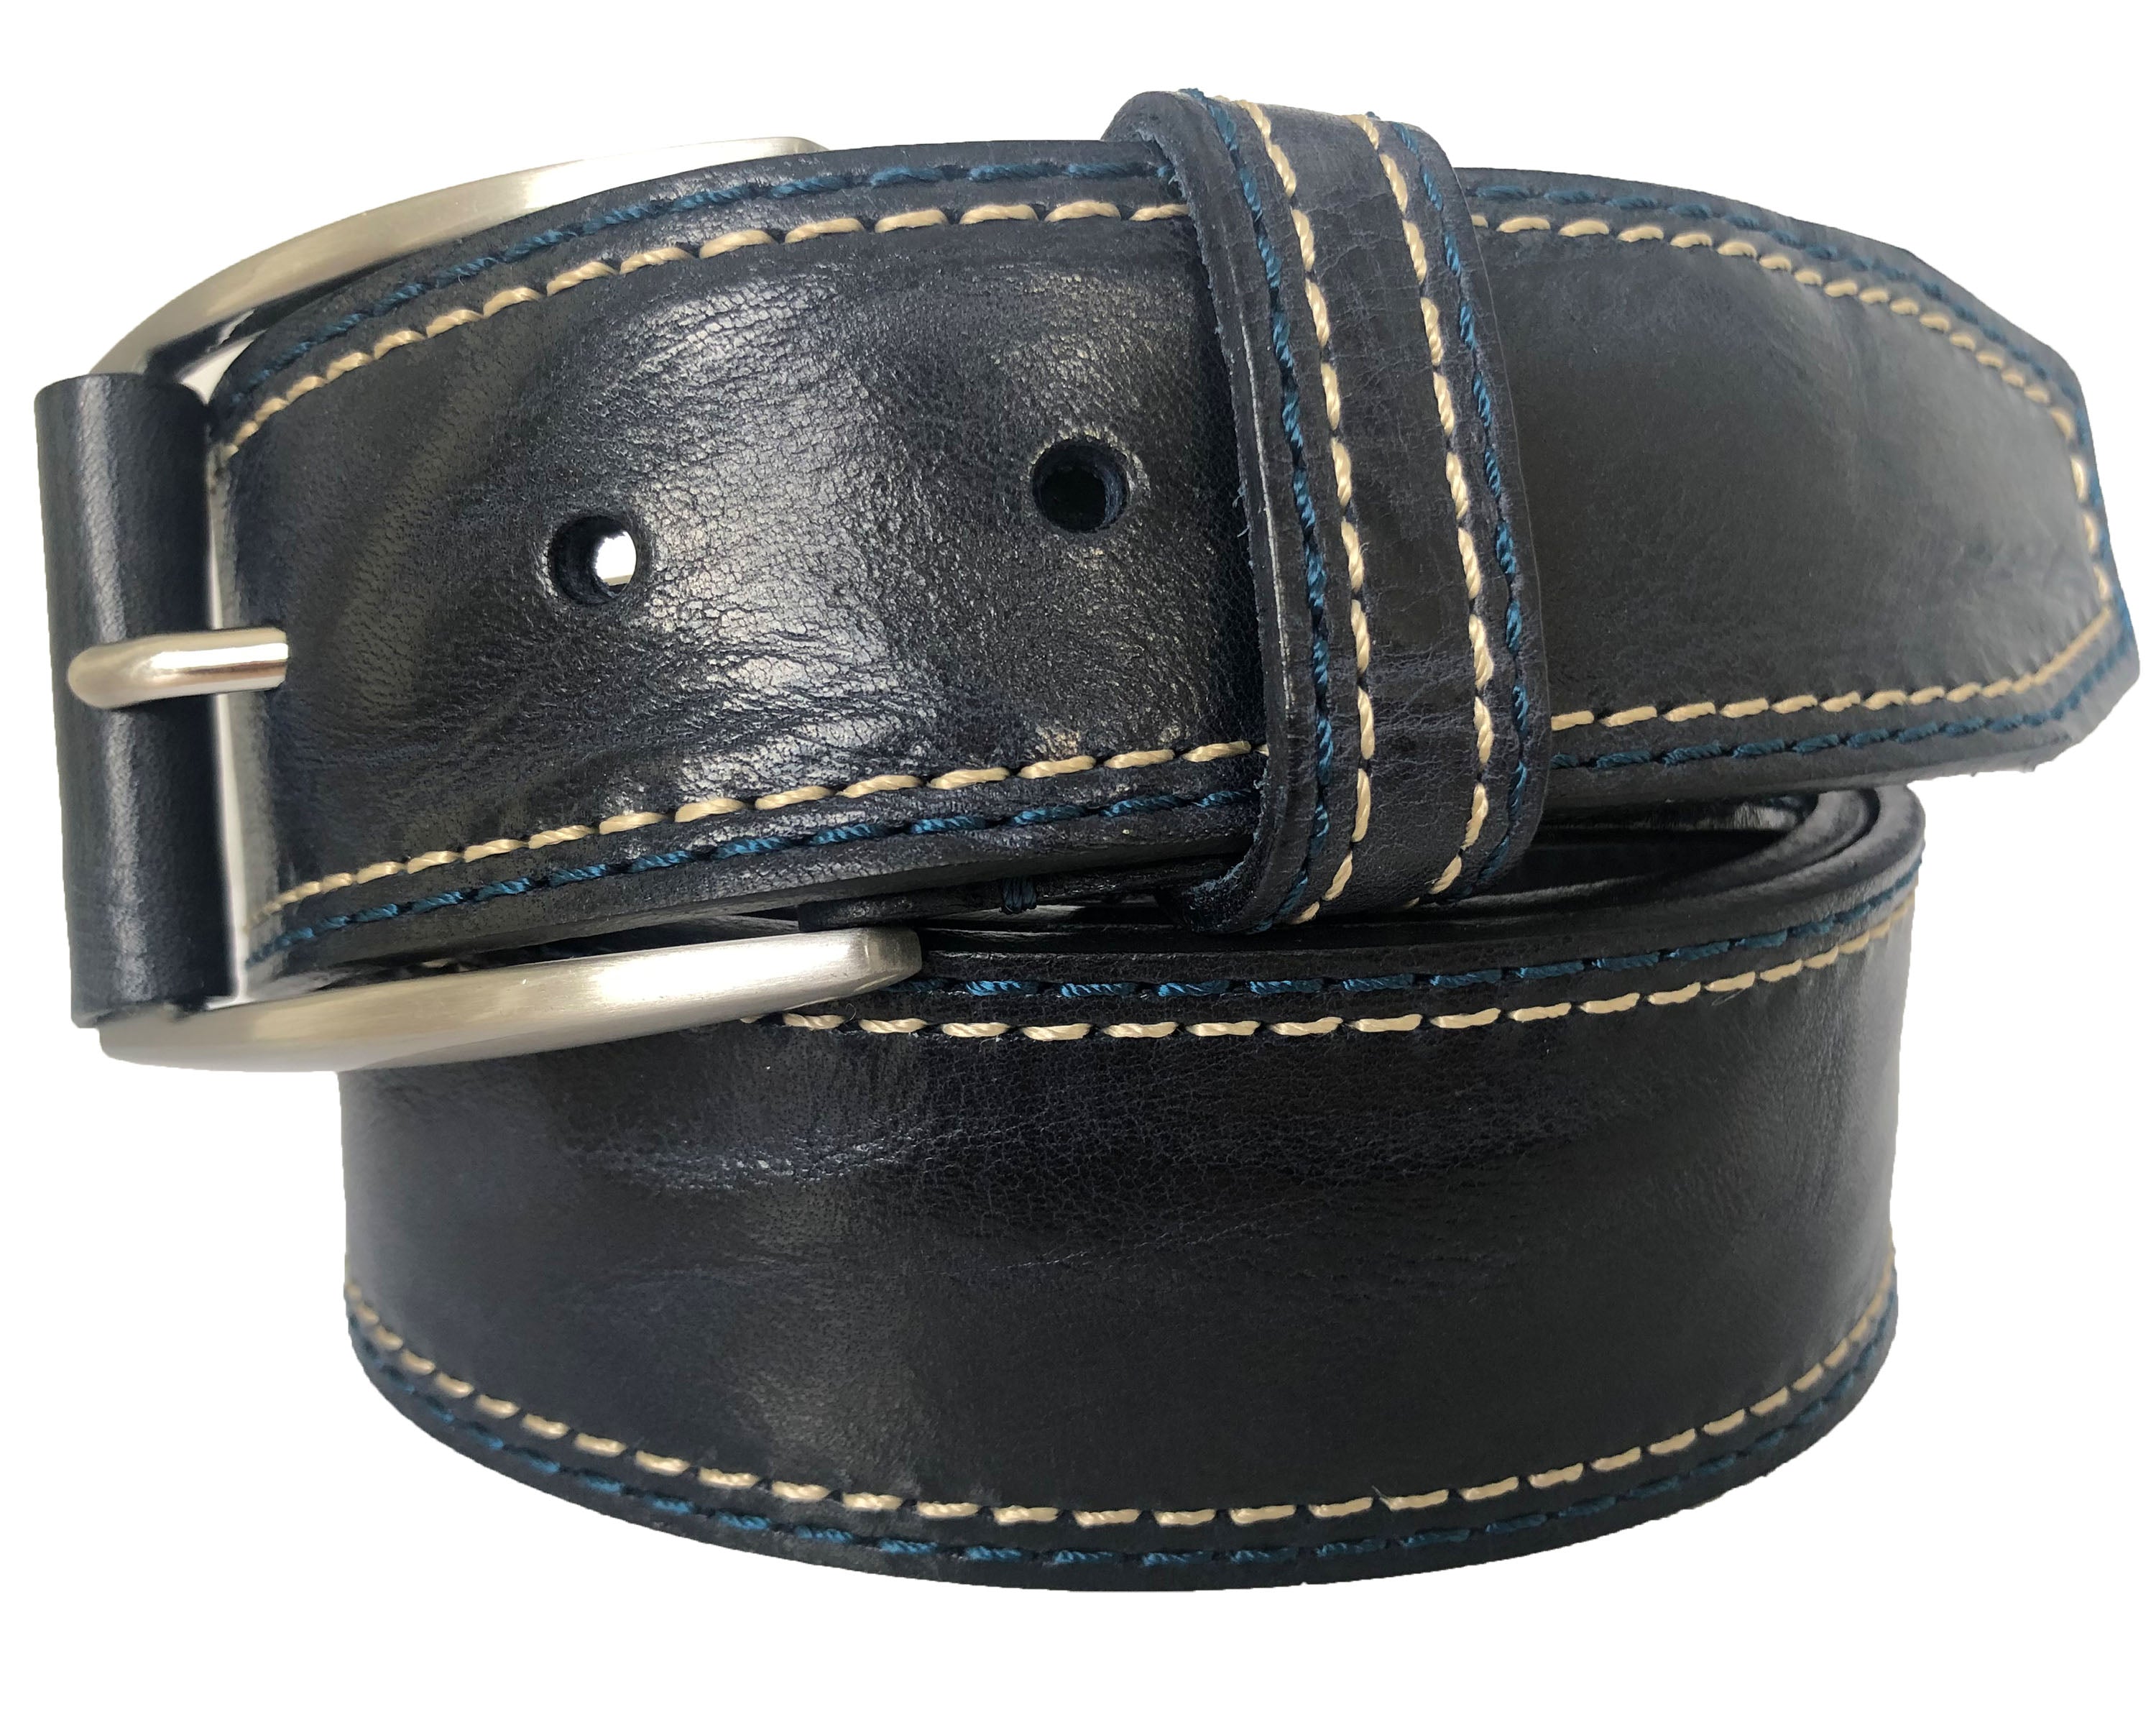 DARKEST BLUE 40MM HIDE LEATHER BELT WITH LEATHER BUCKLE TAB